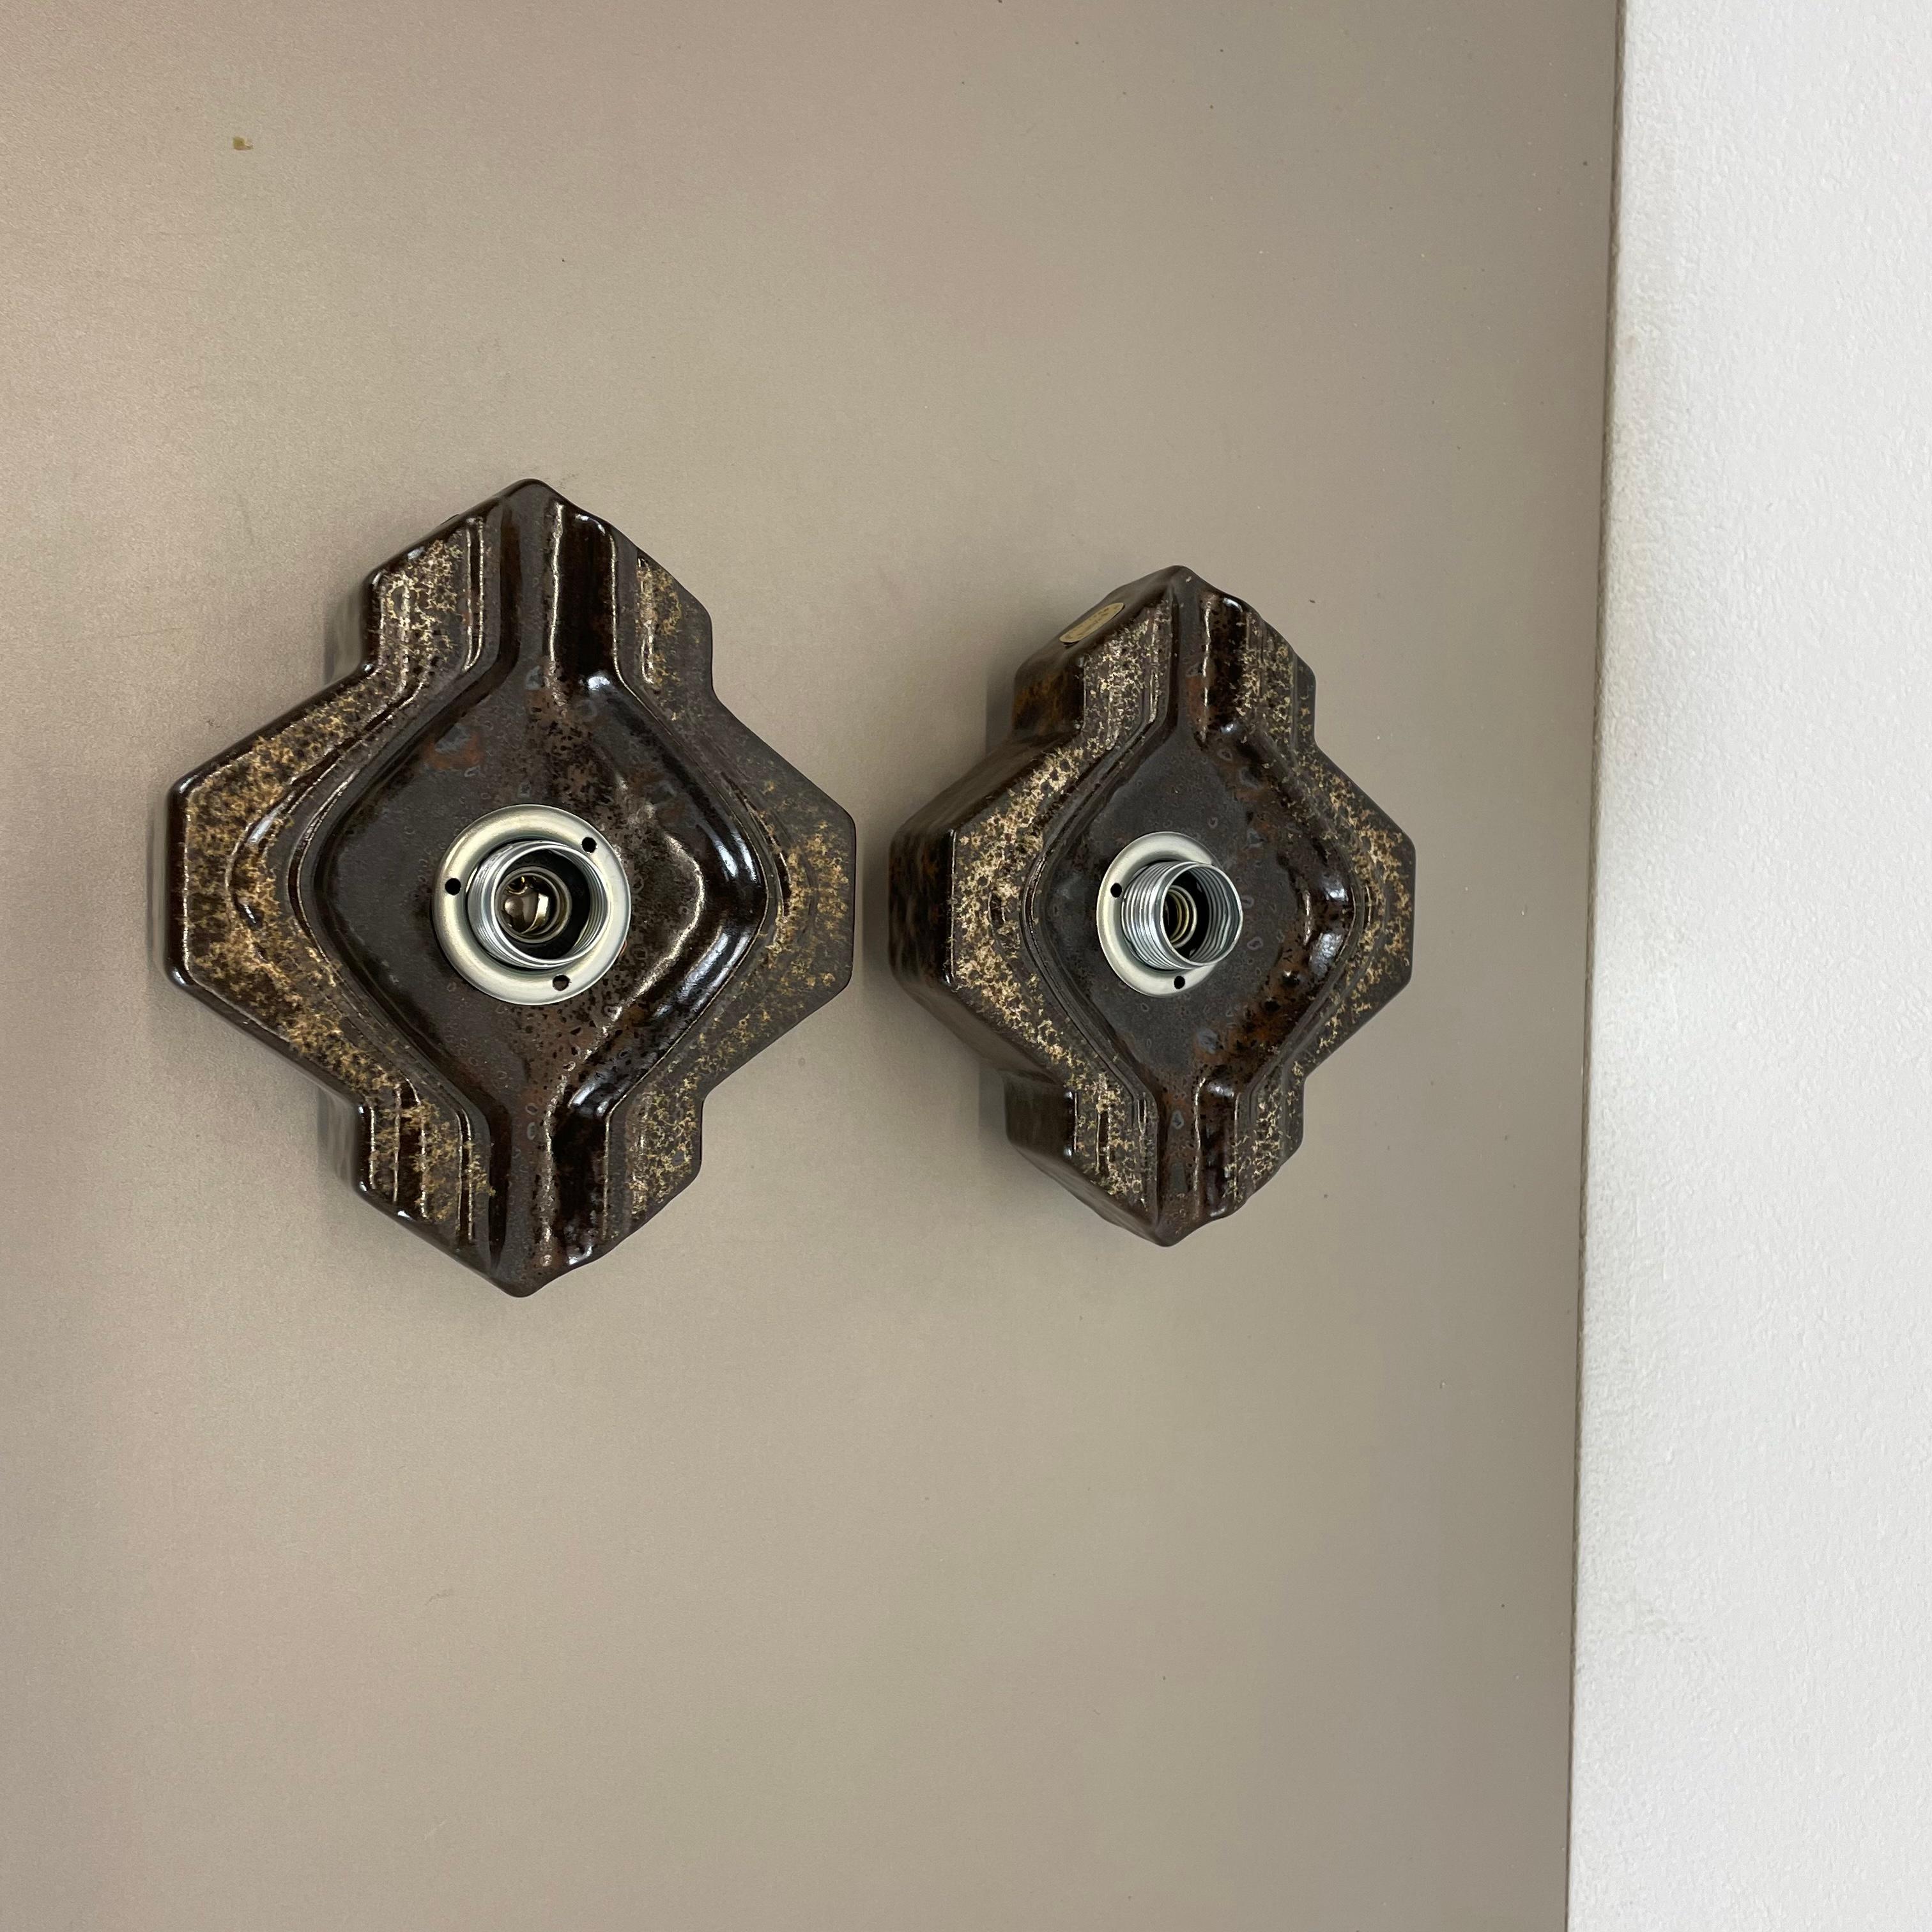 Article:

Wall light sconce set of two


Producer:

Pan Ceramic, Germany.



Origin:

Germany.



Age:

1970s.



Description:

Original 1970s modernist German wall light made of ceramic in fat lava optic. This super rare set of four walls light was